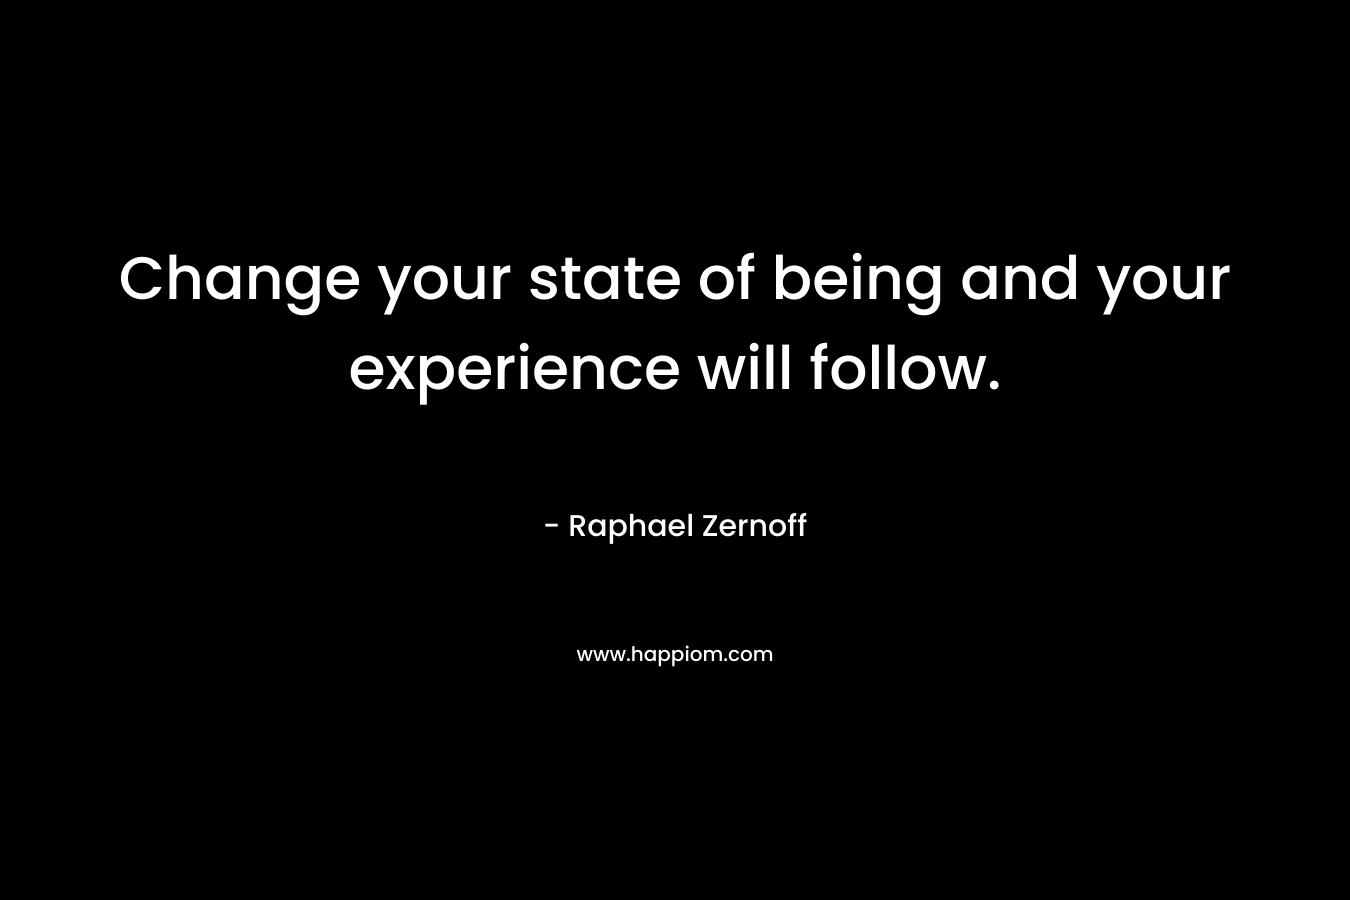 Change your state of being and your experience will follow.